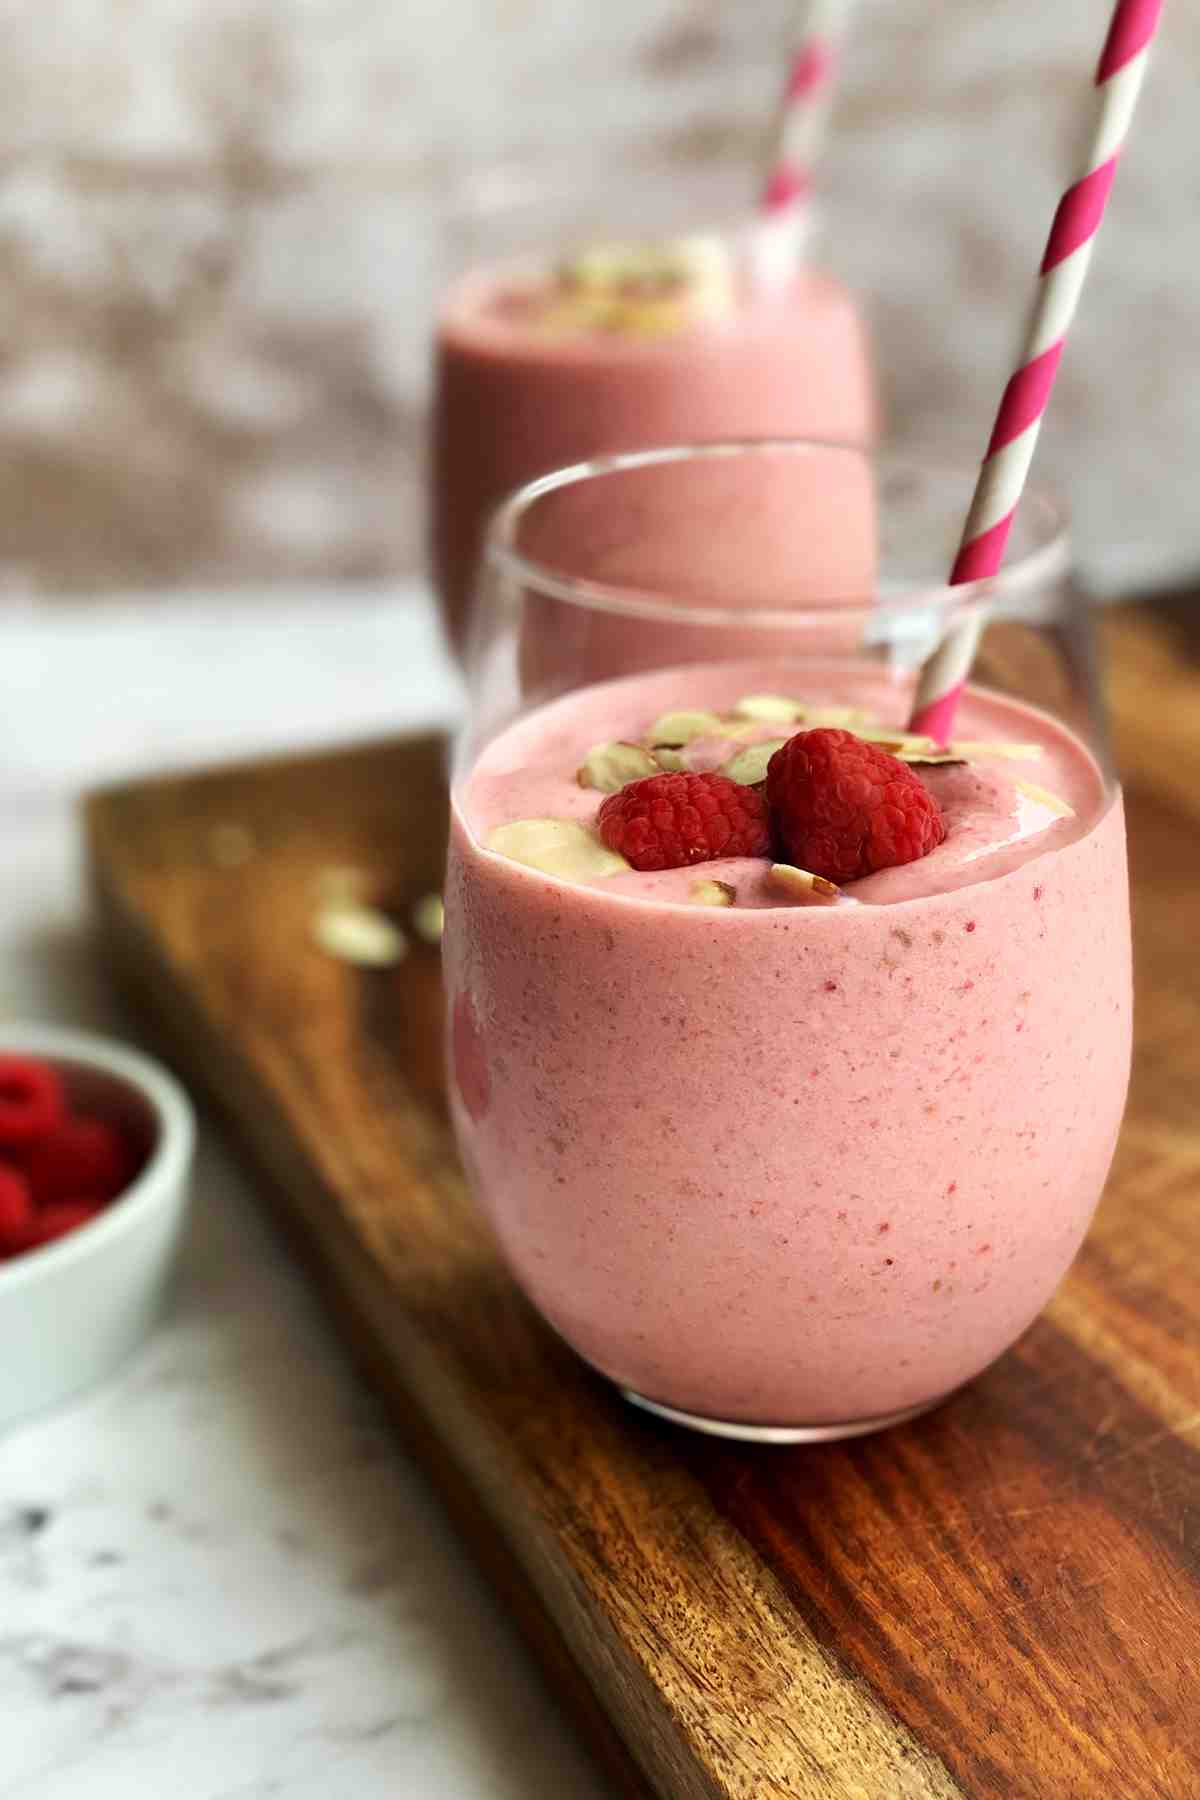 Strawberry banana raspberry smoothie in a glass on wooden board.